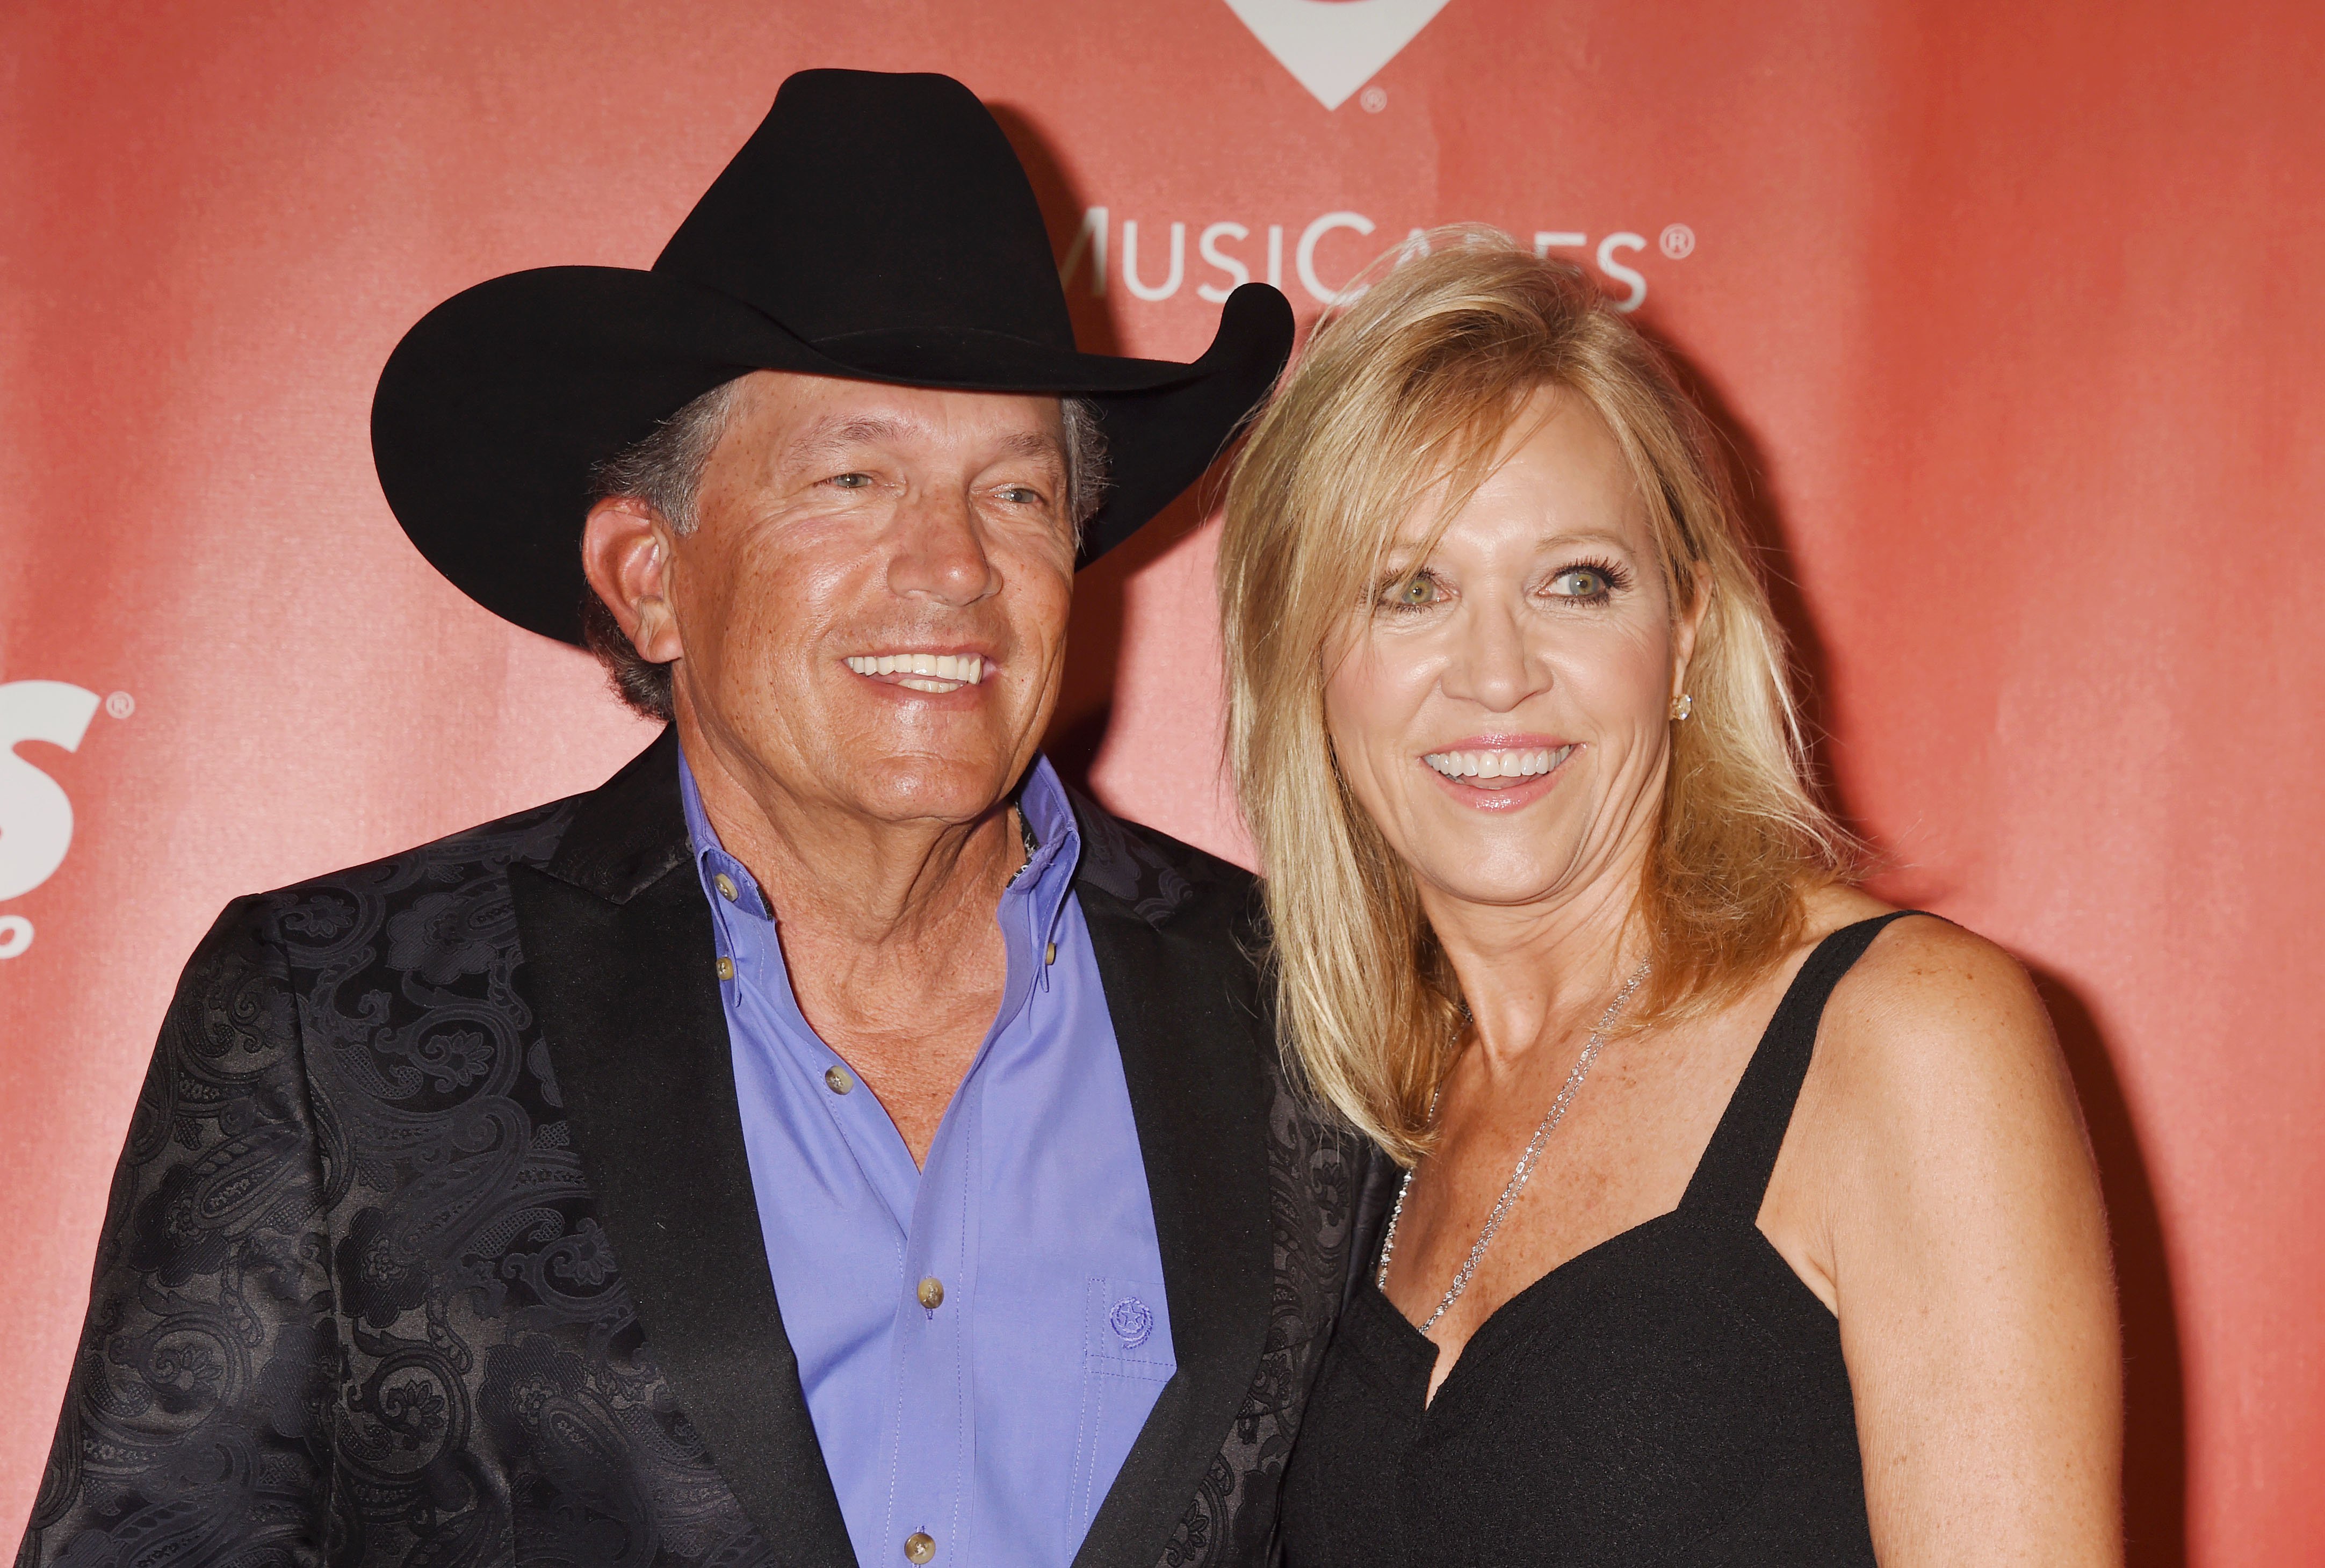 George Strait with his wife, Norma at the Los Angeles Convention Center on February 10, 2017 in Los Angeles, California. ! Source: Getty Images